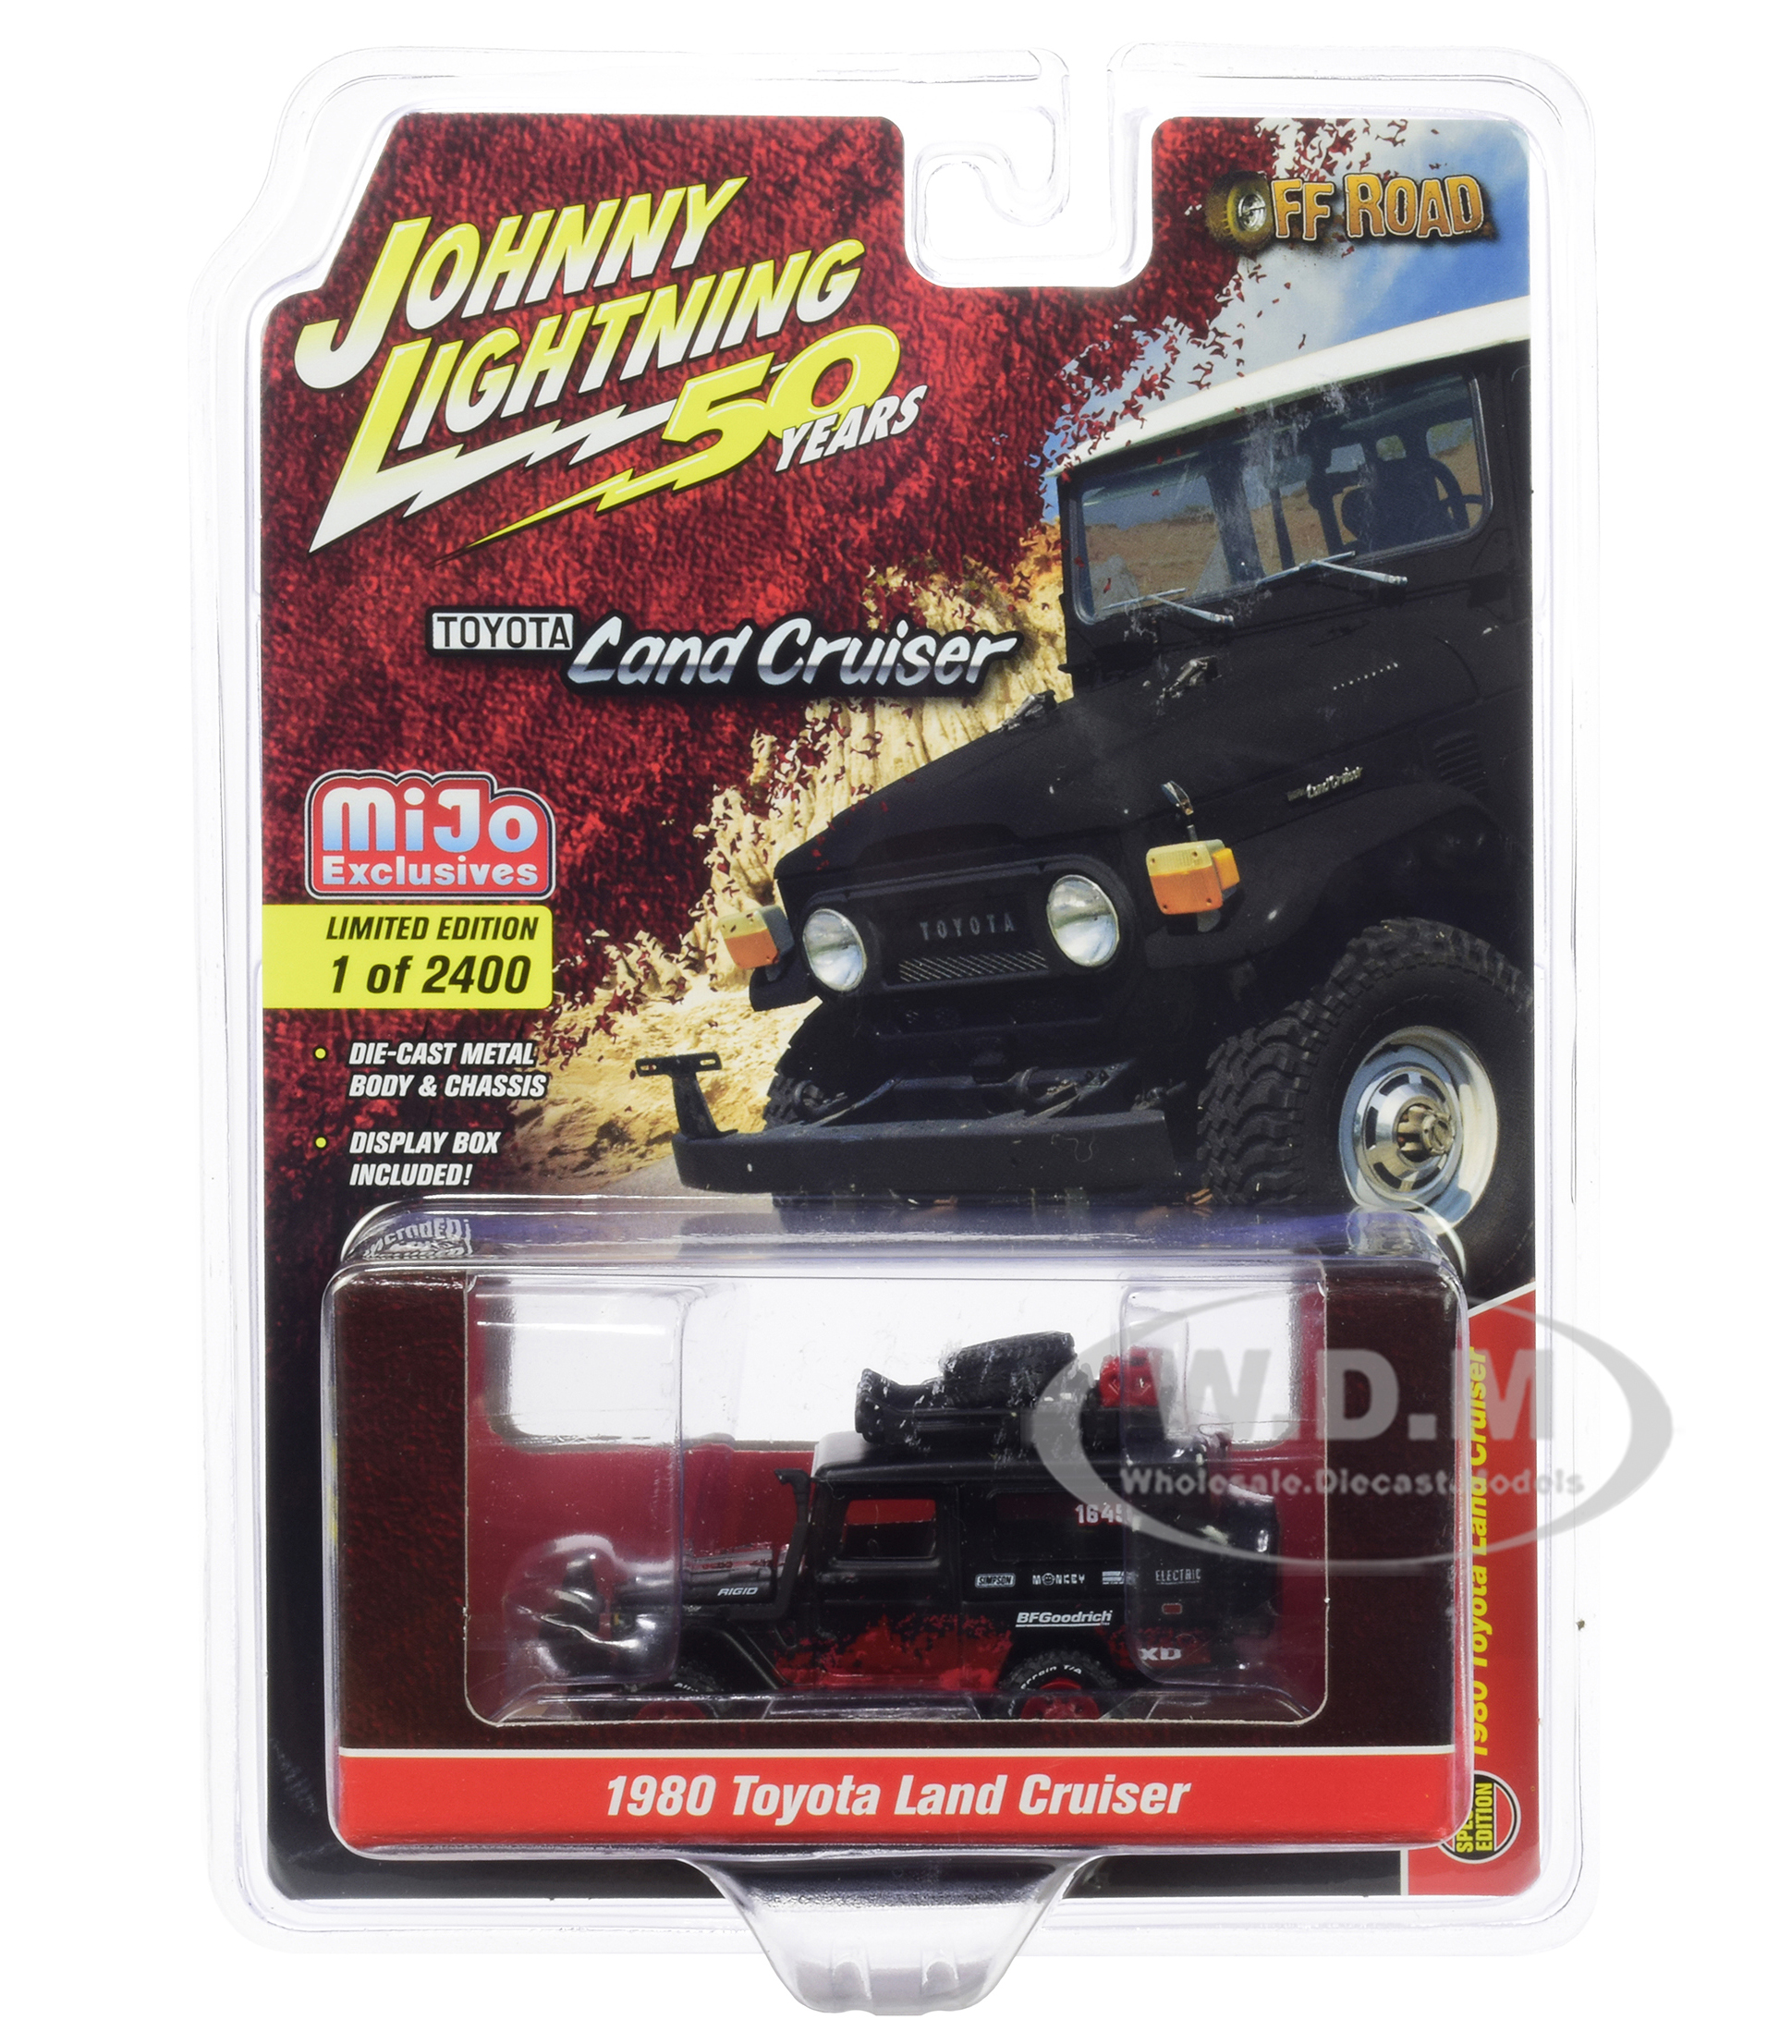 1980 Toyota Land Cruiser Matt Black And Red With Accessories "off-road" "johnny Lightning 50th Anniversary" Limited Edition To 2400 Pieces Worldwide